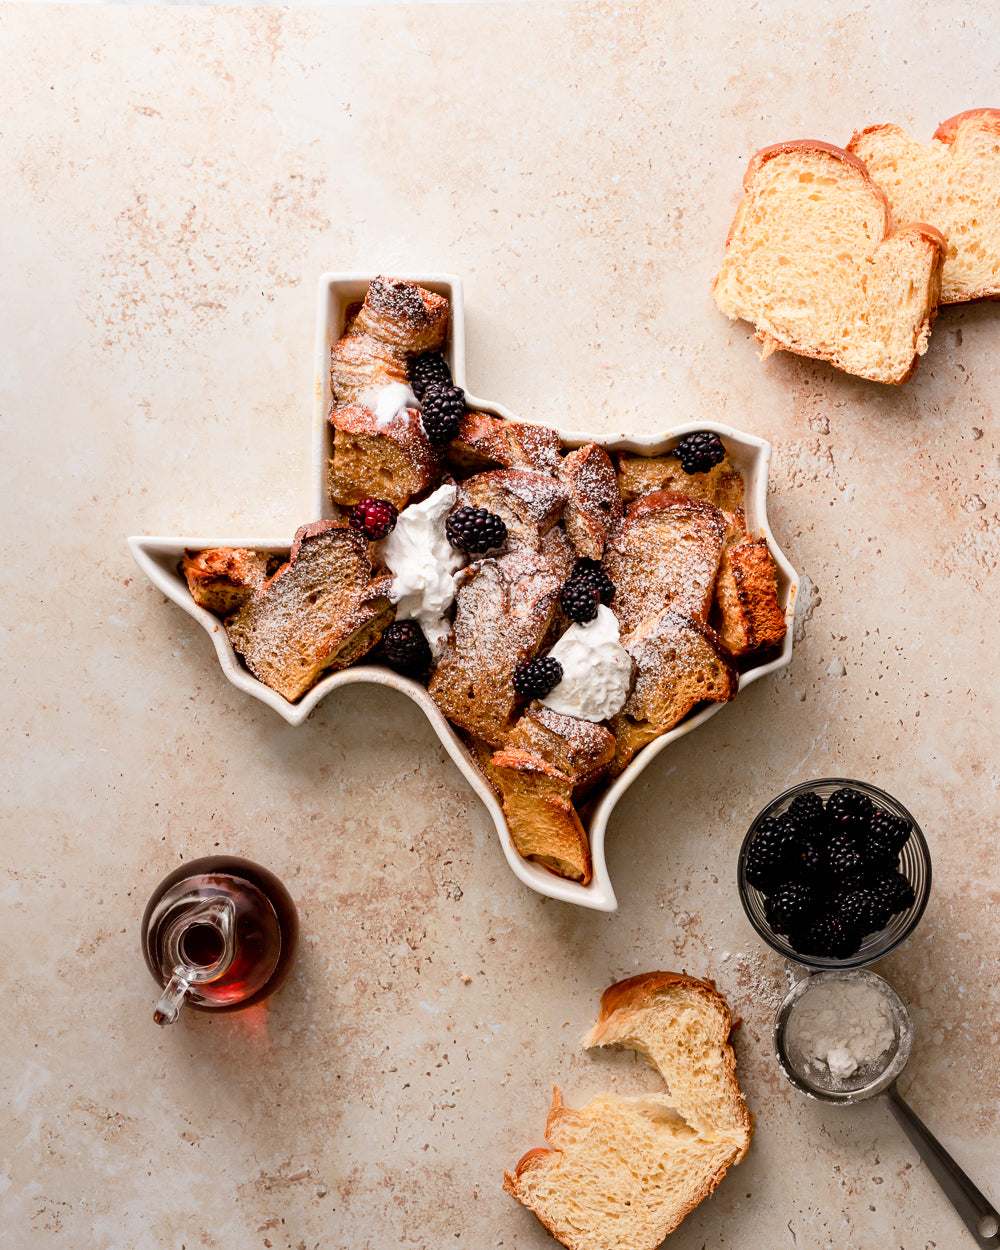 Texas state plate white glossy ceramics. Texas baking dish. Texas baking tray. Texas appetizer dish. Texas cheese plate. TX gift. TX cooking gift. TX baking gift. Texas kitchen gift. Texas dessert. Texas plate for dessert. Texas dish for dessert. Texas dessert recipe. Bread pudding in Texas. 